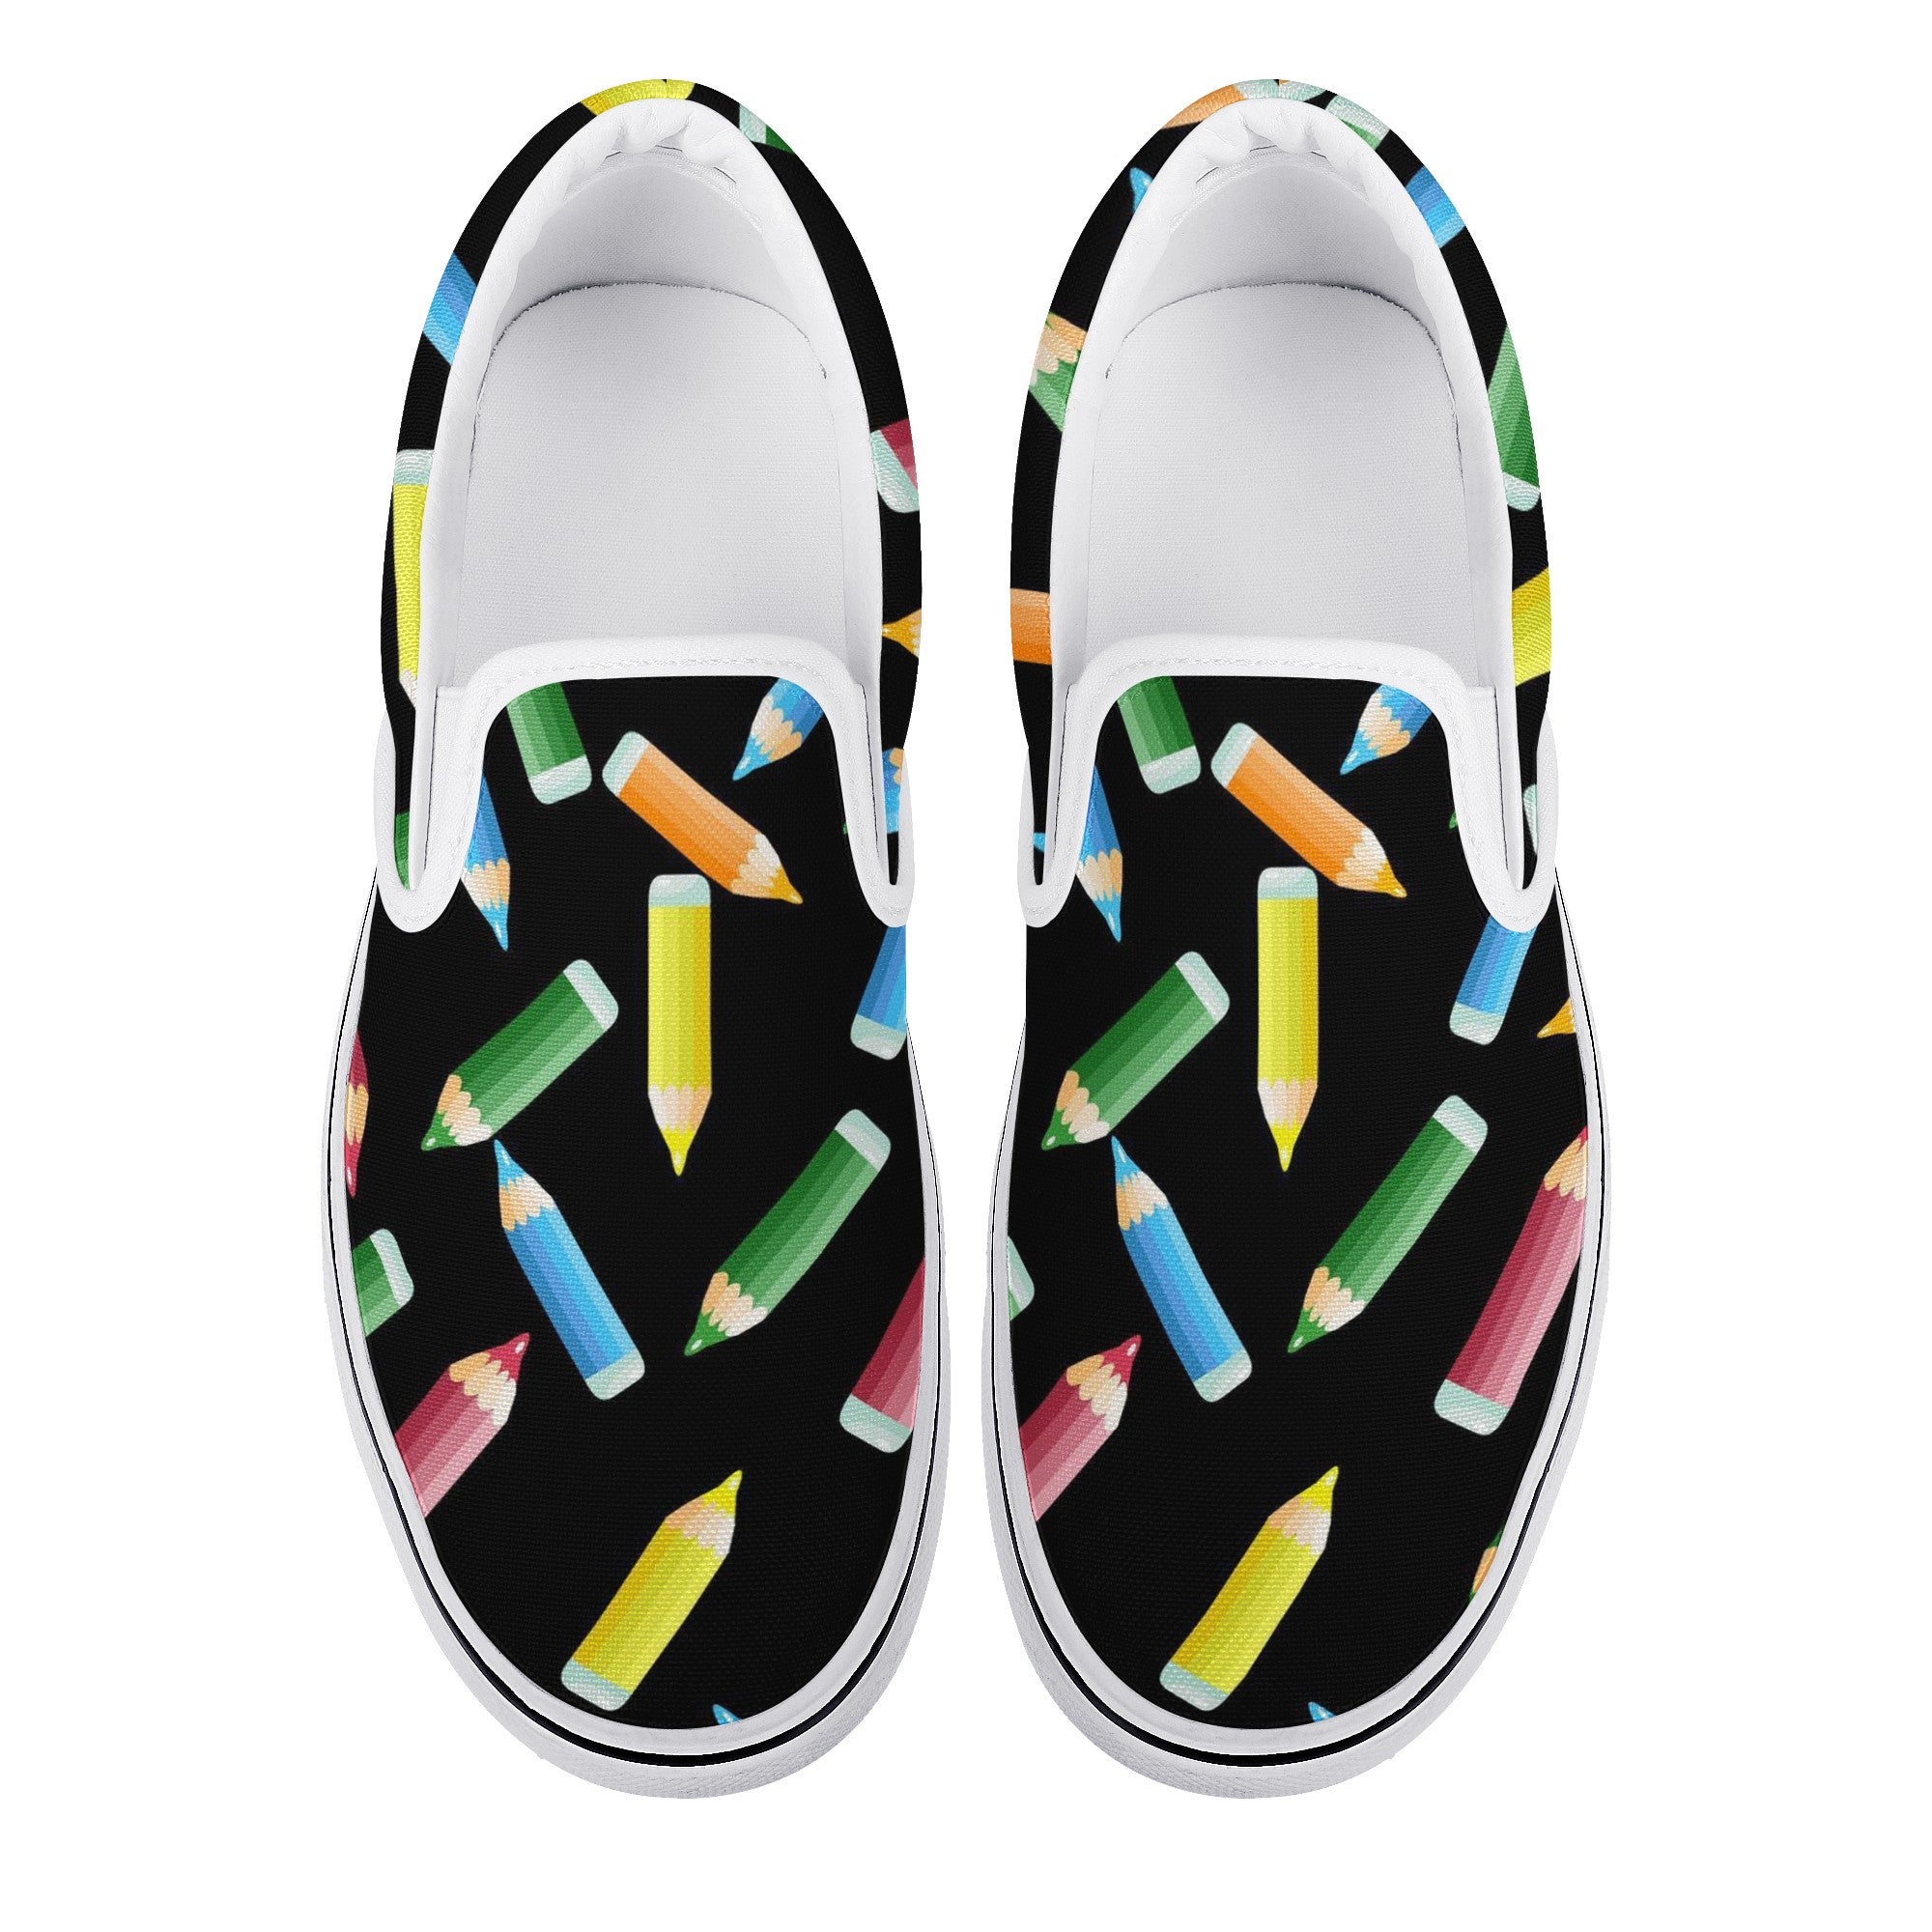 pencil pattern New Slip On Shoes